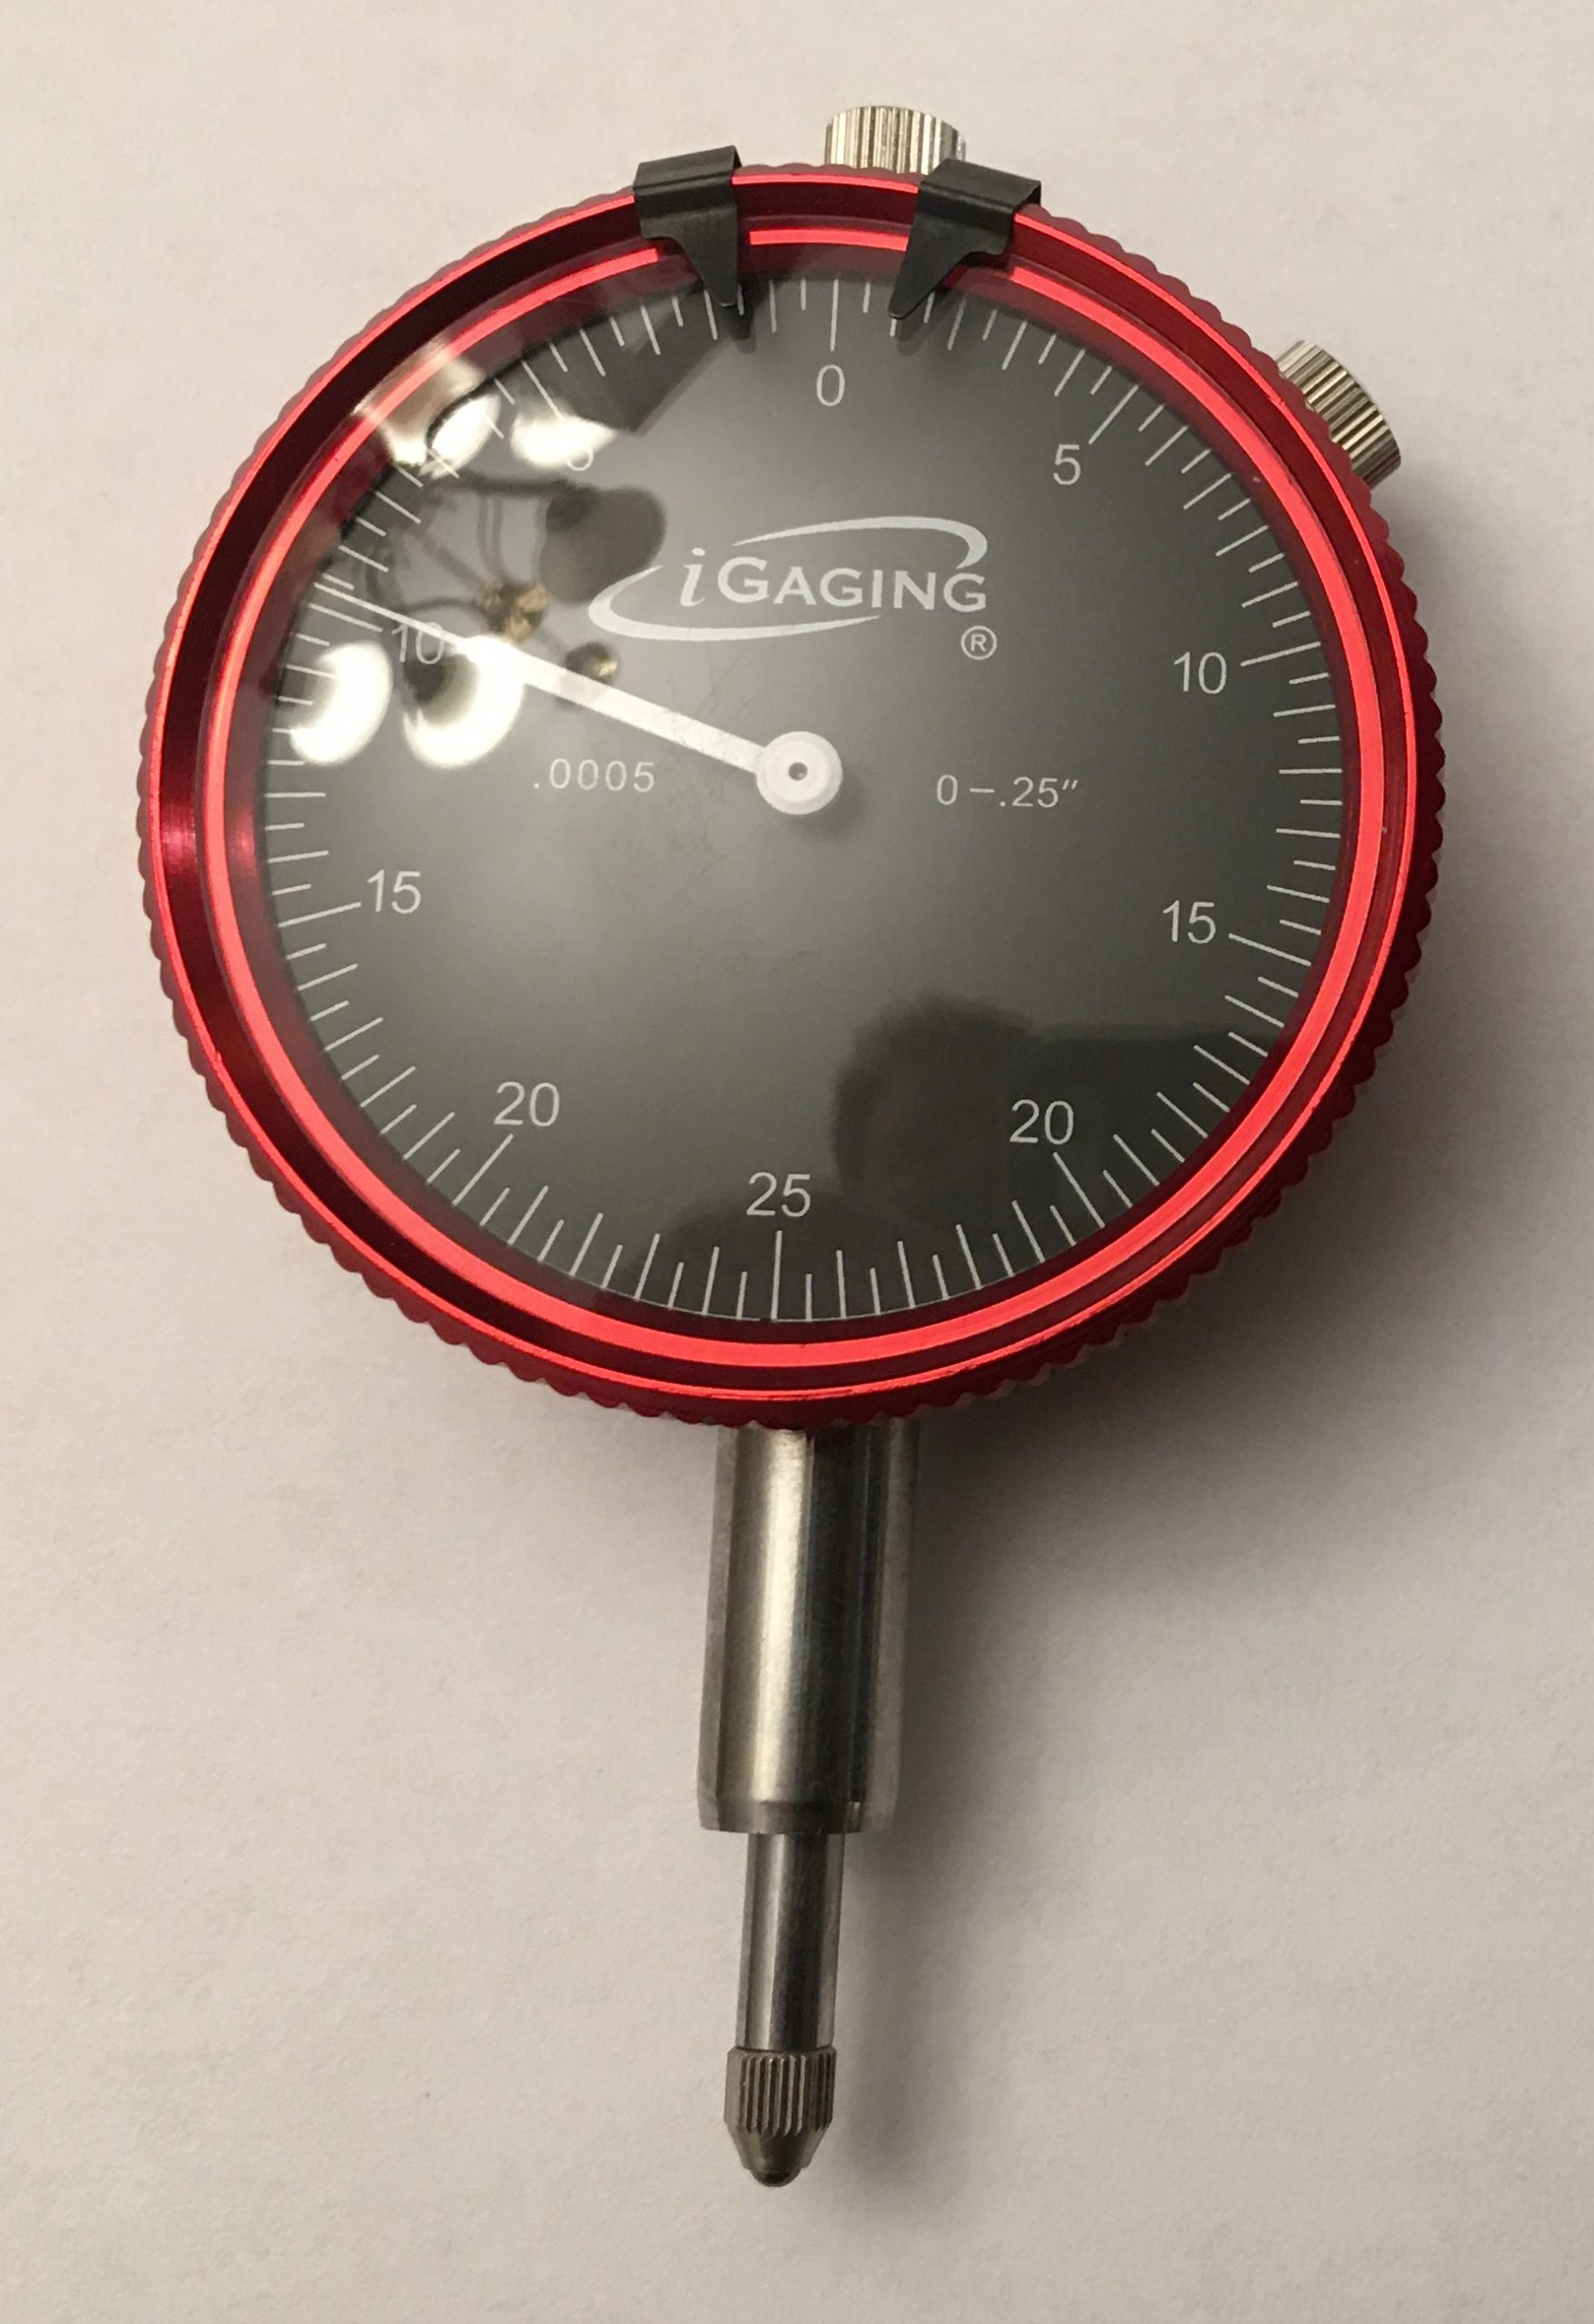 iGaging Dial Test Indicator Gauge with .25" Travel and Accuracy to .0005"